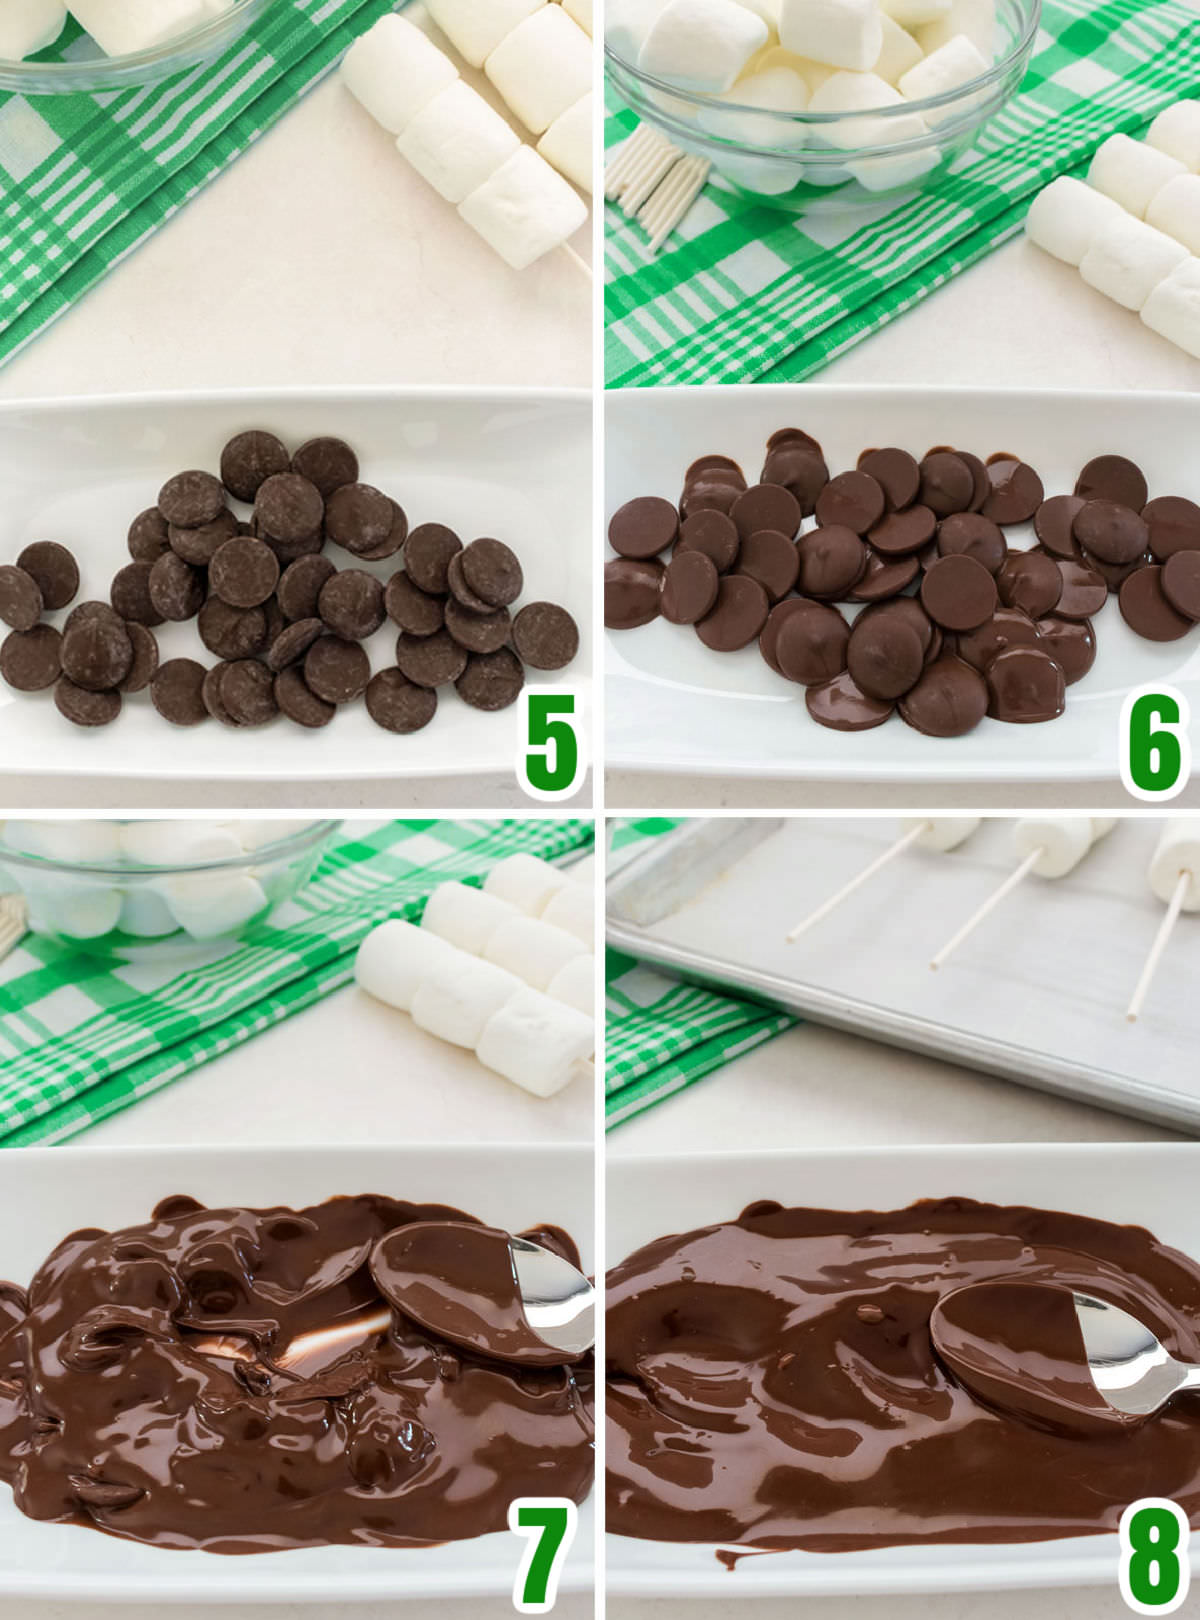 Collage image showing how to melt the chocolate for the St. Patrick's Day Marshmallow Pops.